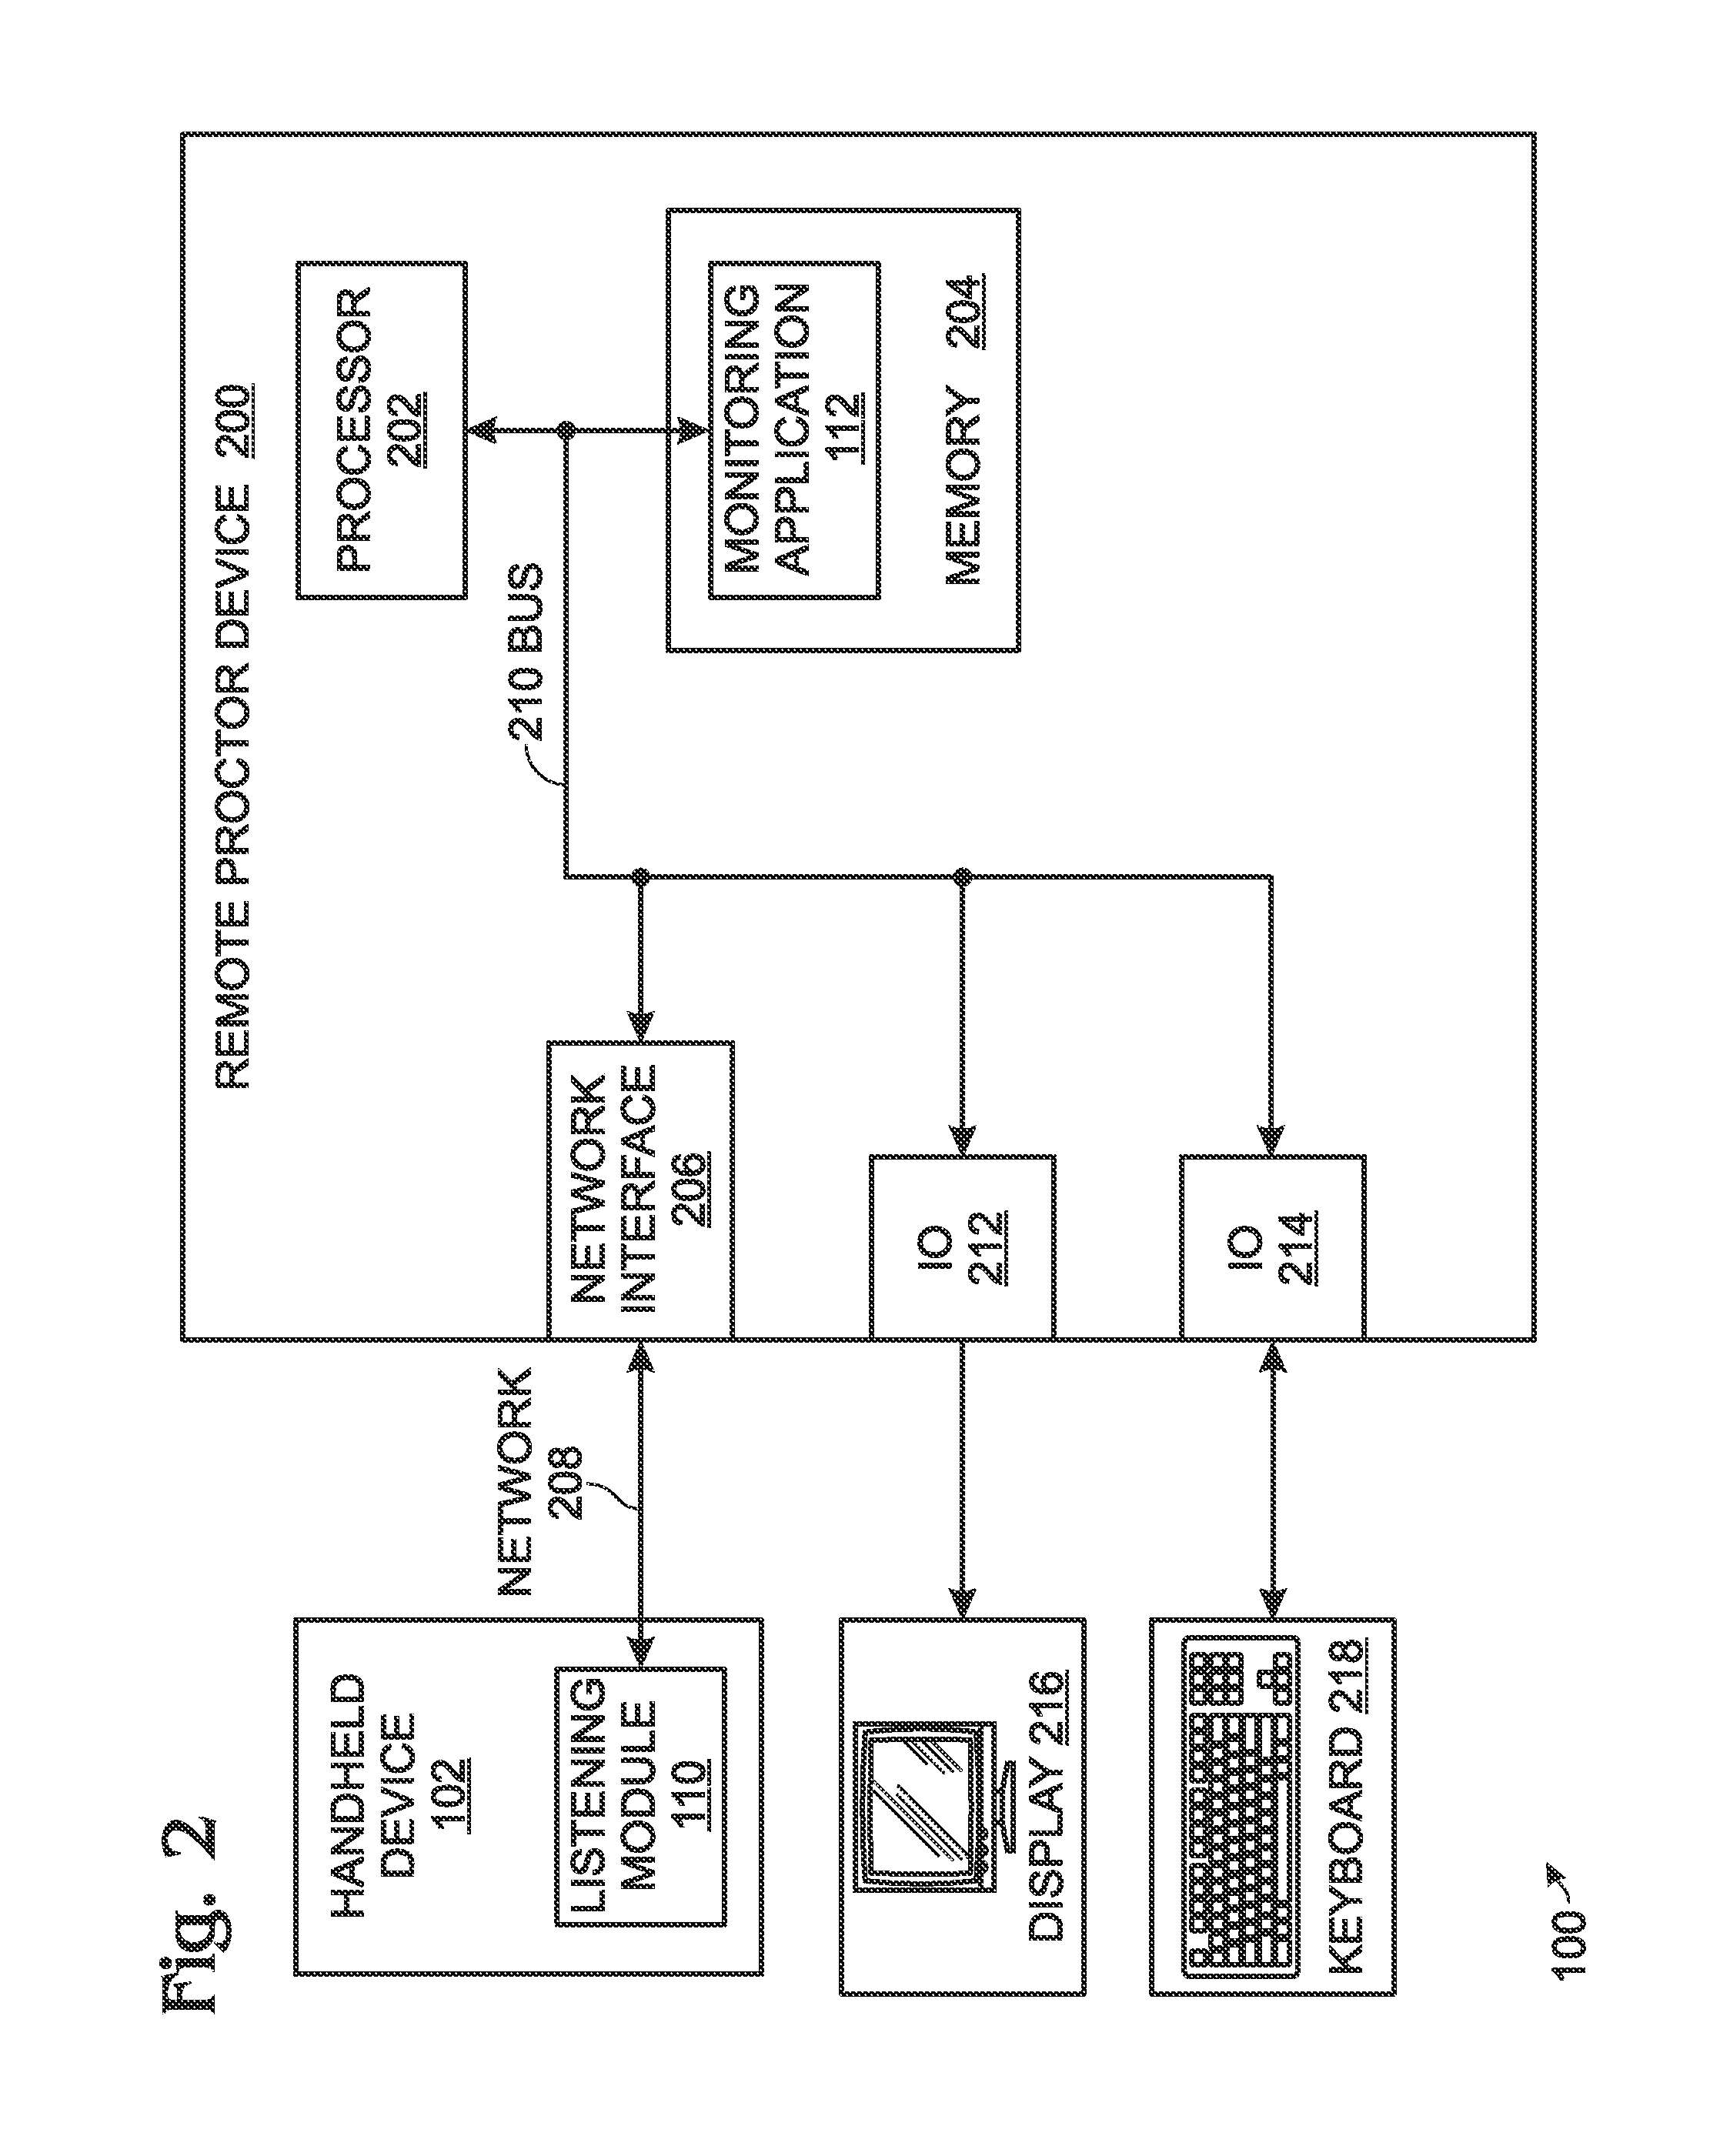 System and Method for Monitoring Handheld Devices in a User Testing Mode